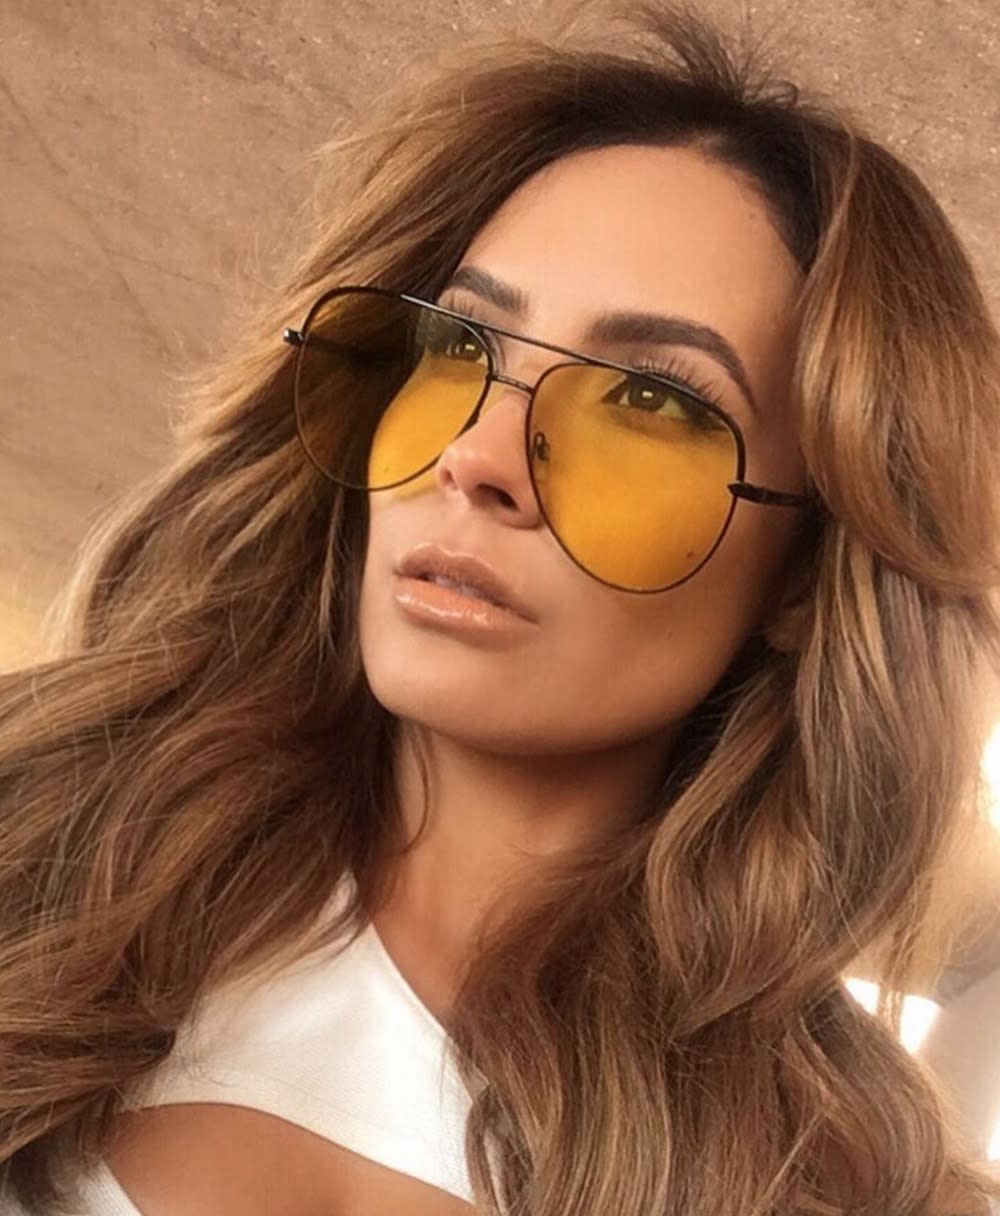 Desi Perkins’s new Sahara sunglasses collection with Quay Australia is giving us heart-eyes